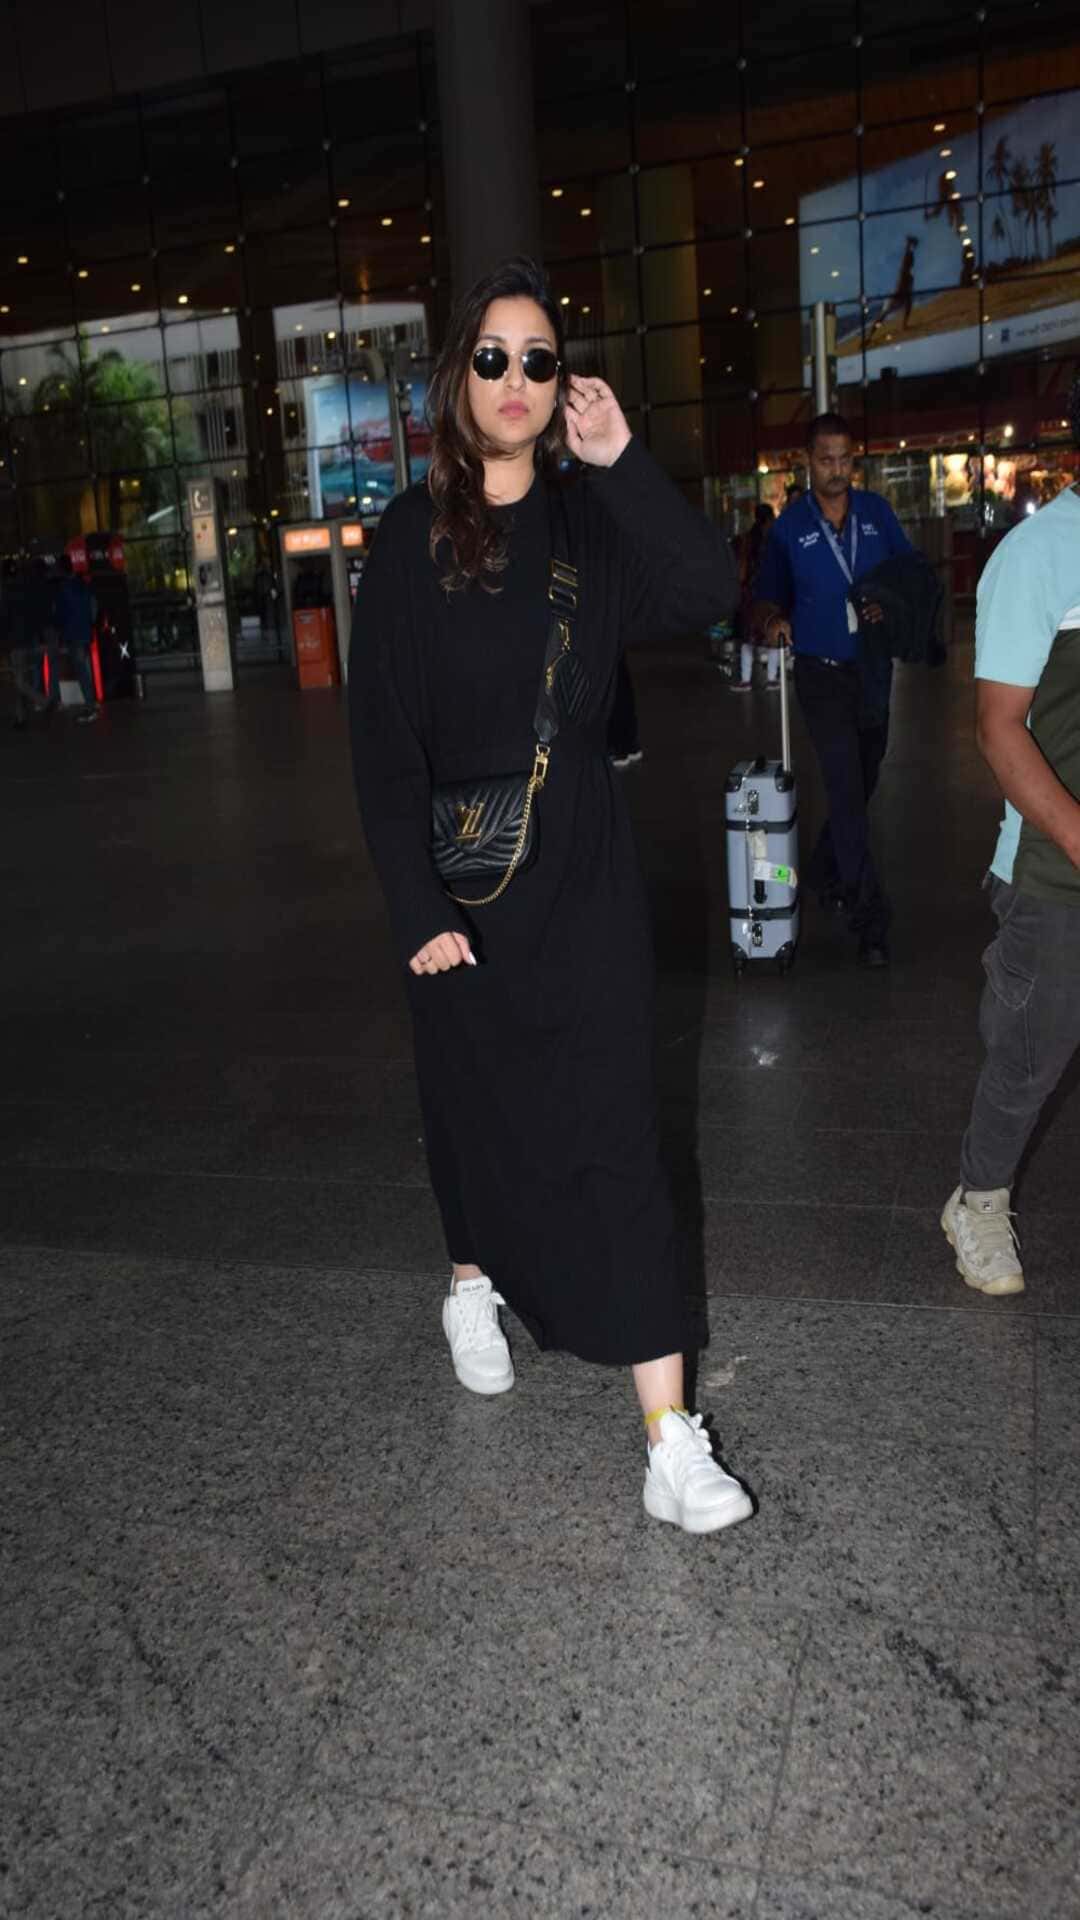 Parineeti Chopra Dazzles In A Black Dress At Airport, Styles It With A LV  Bag Worth Rs. 2.23 Lakhs